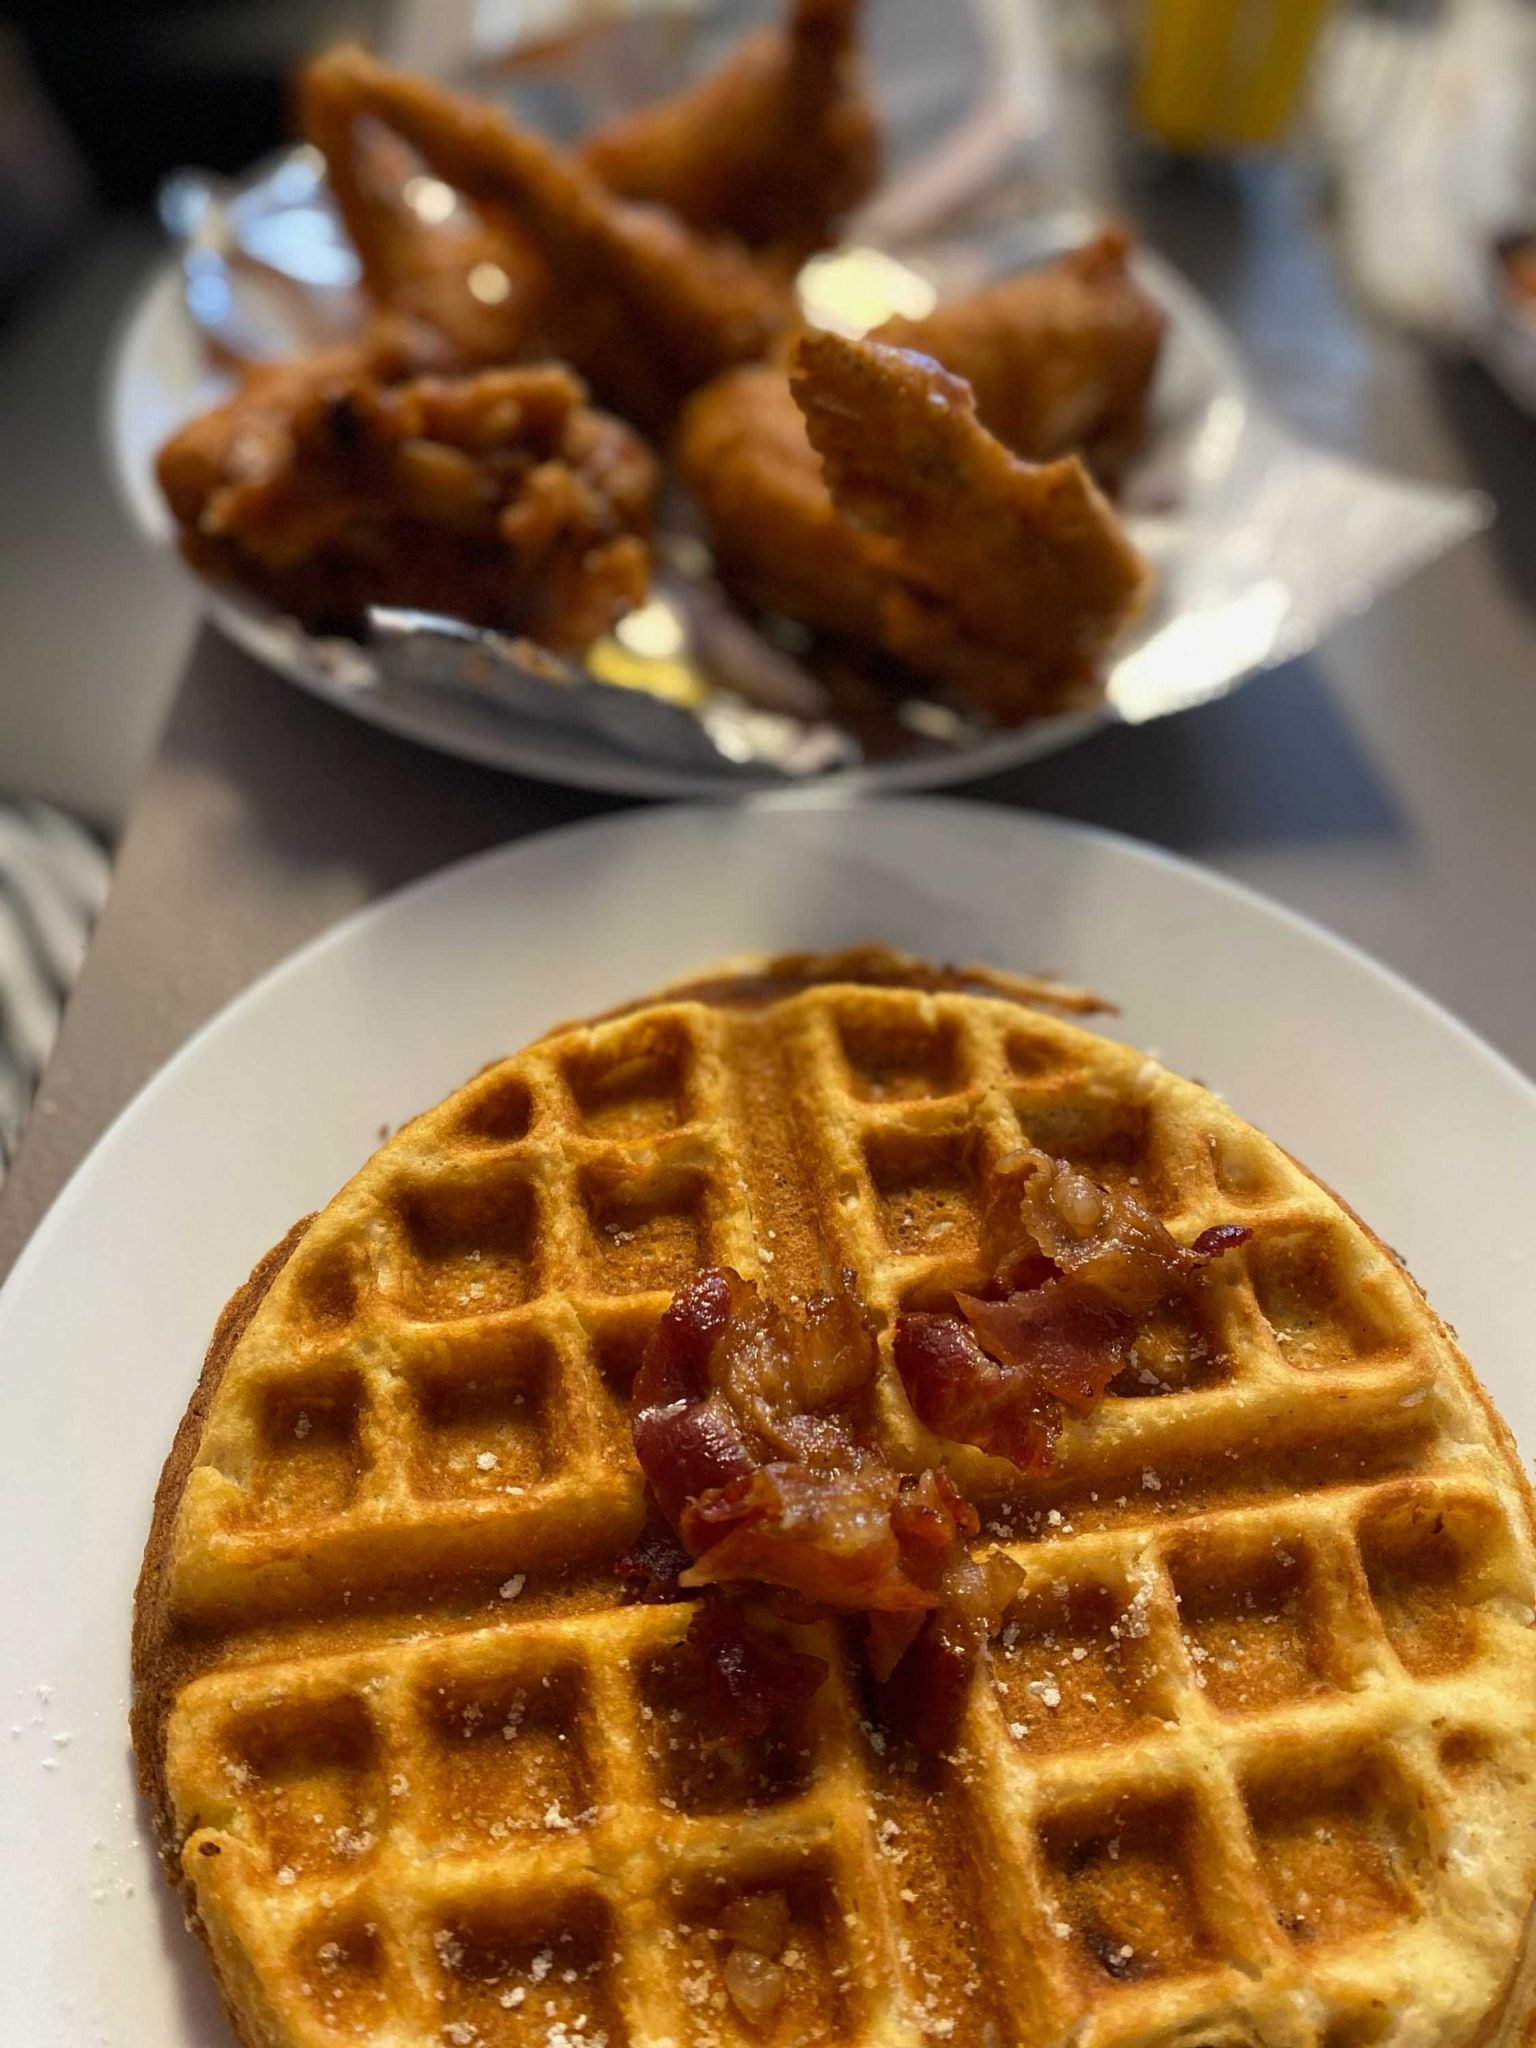 The chicken and waffles at The Yellow Bee!